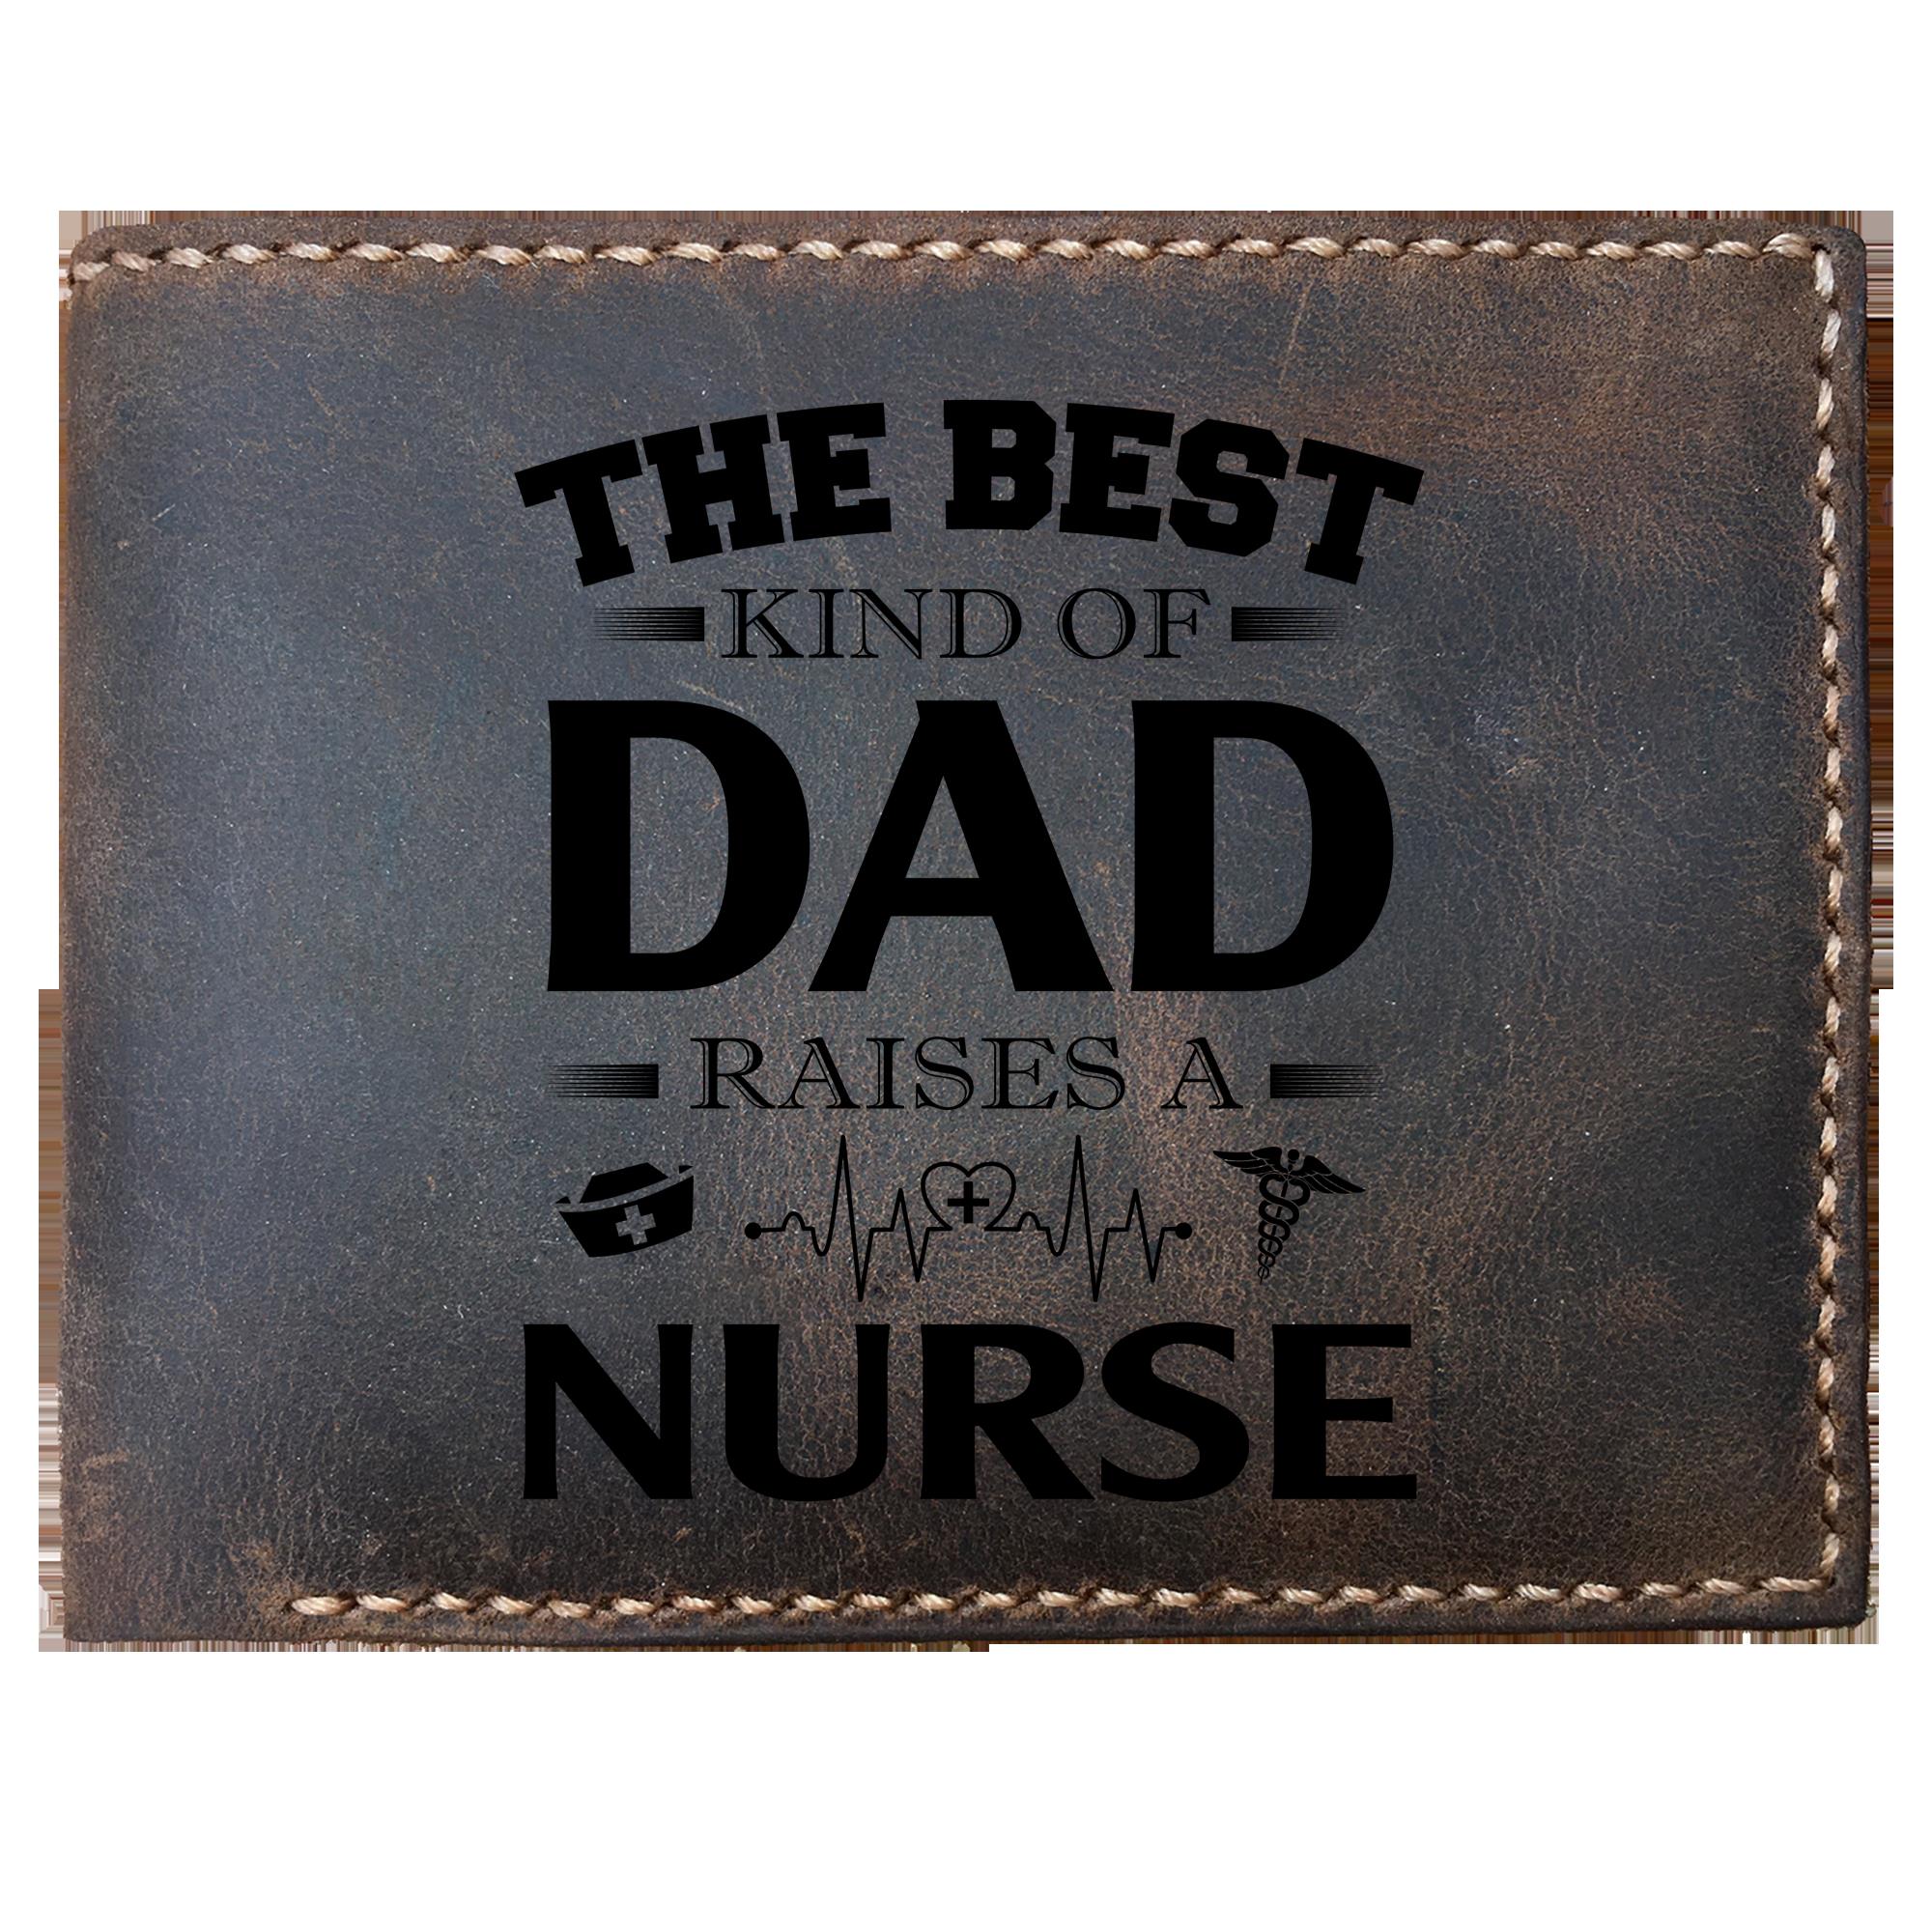 Skitongifts Funny Custom Laser Engraved Bifold Leather Wallet For Men, Great For Dad The Best Kind Of Dad Raises A Nurse